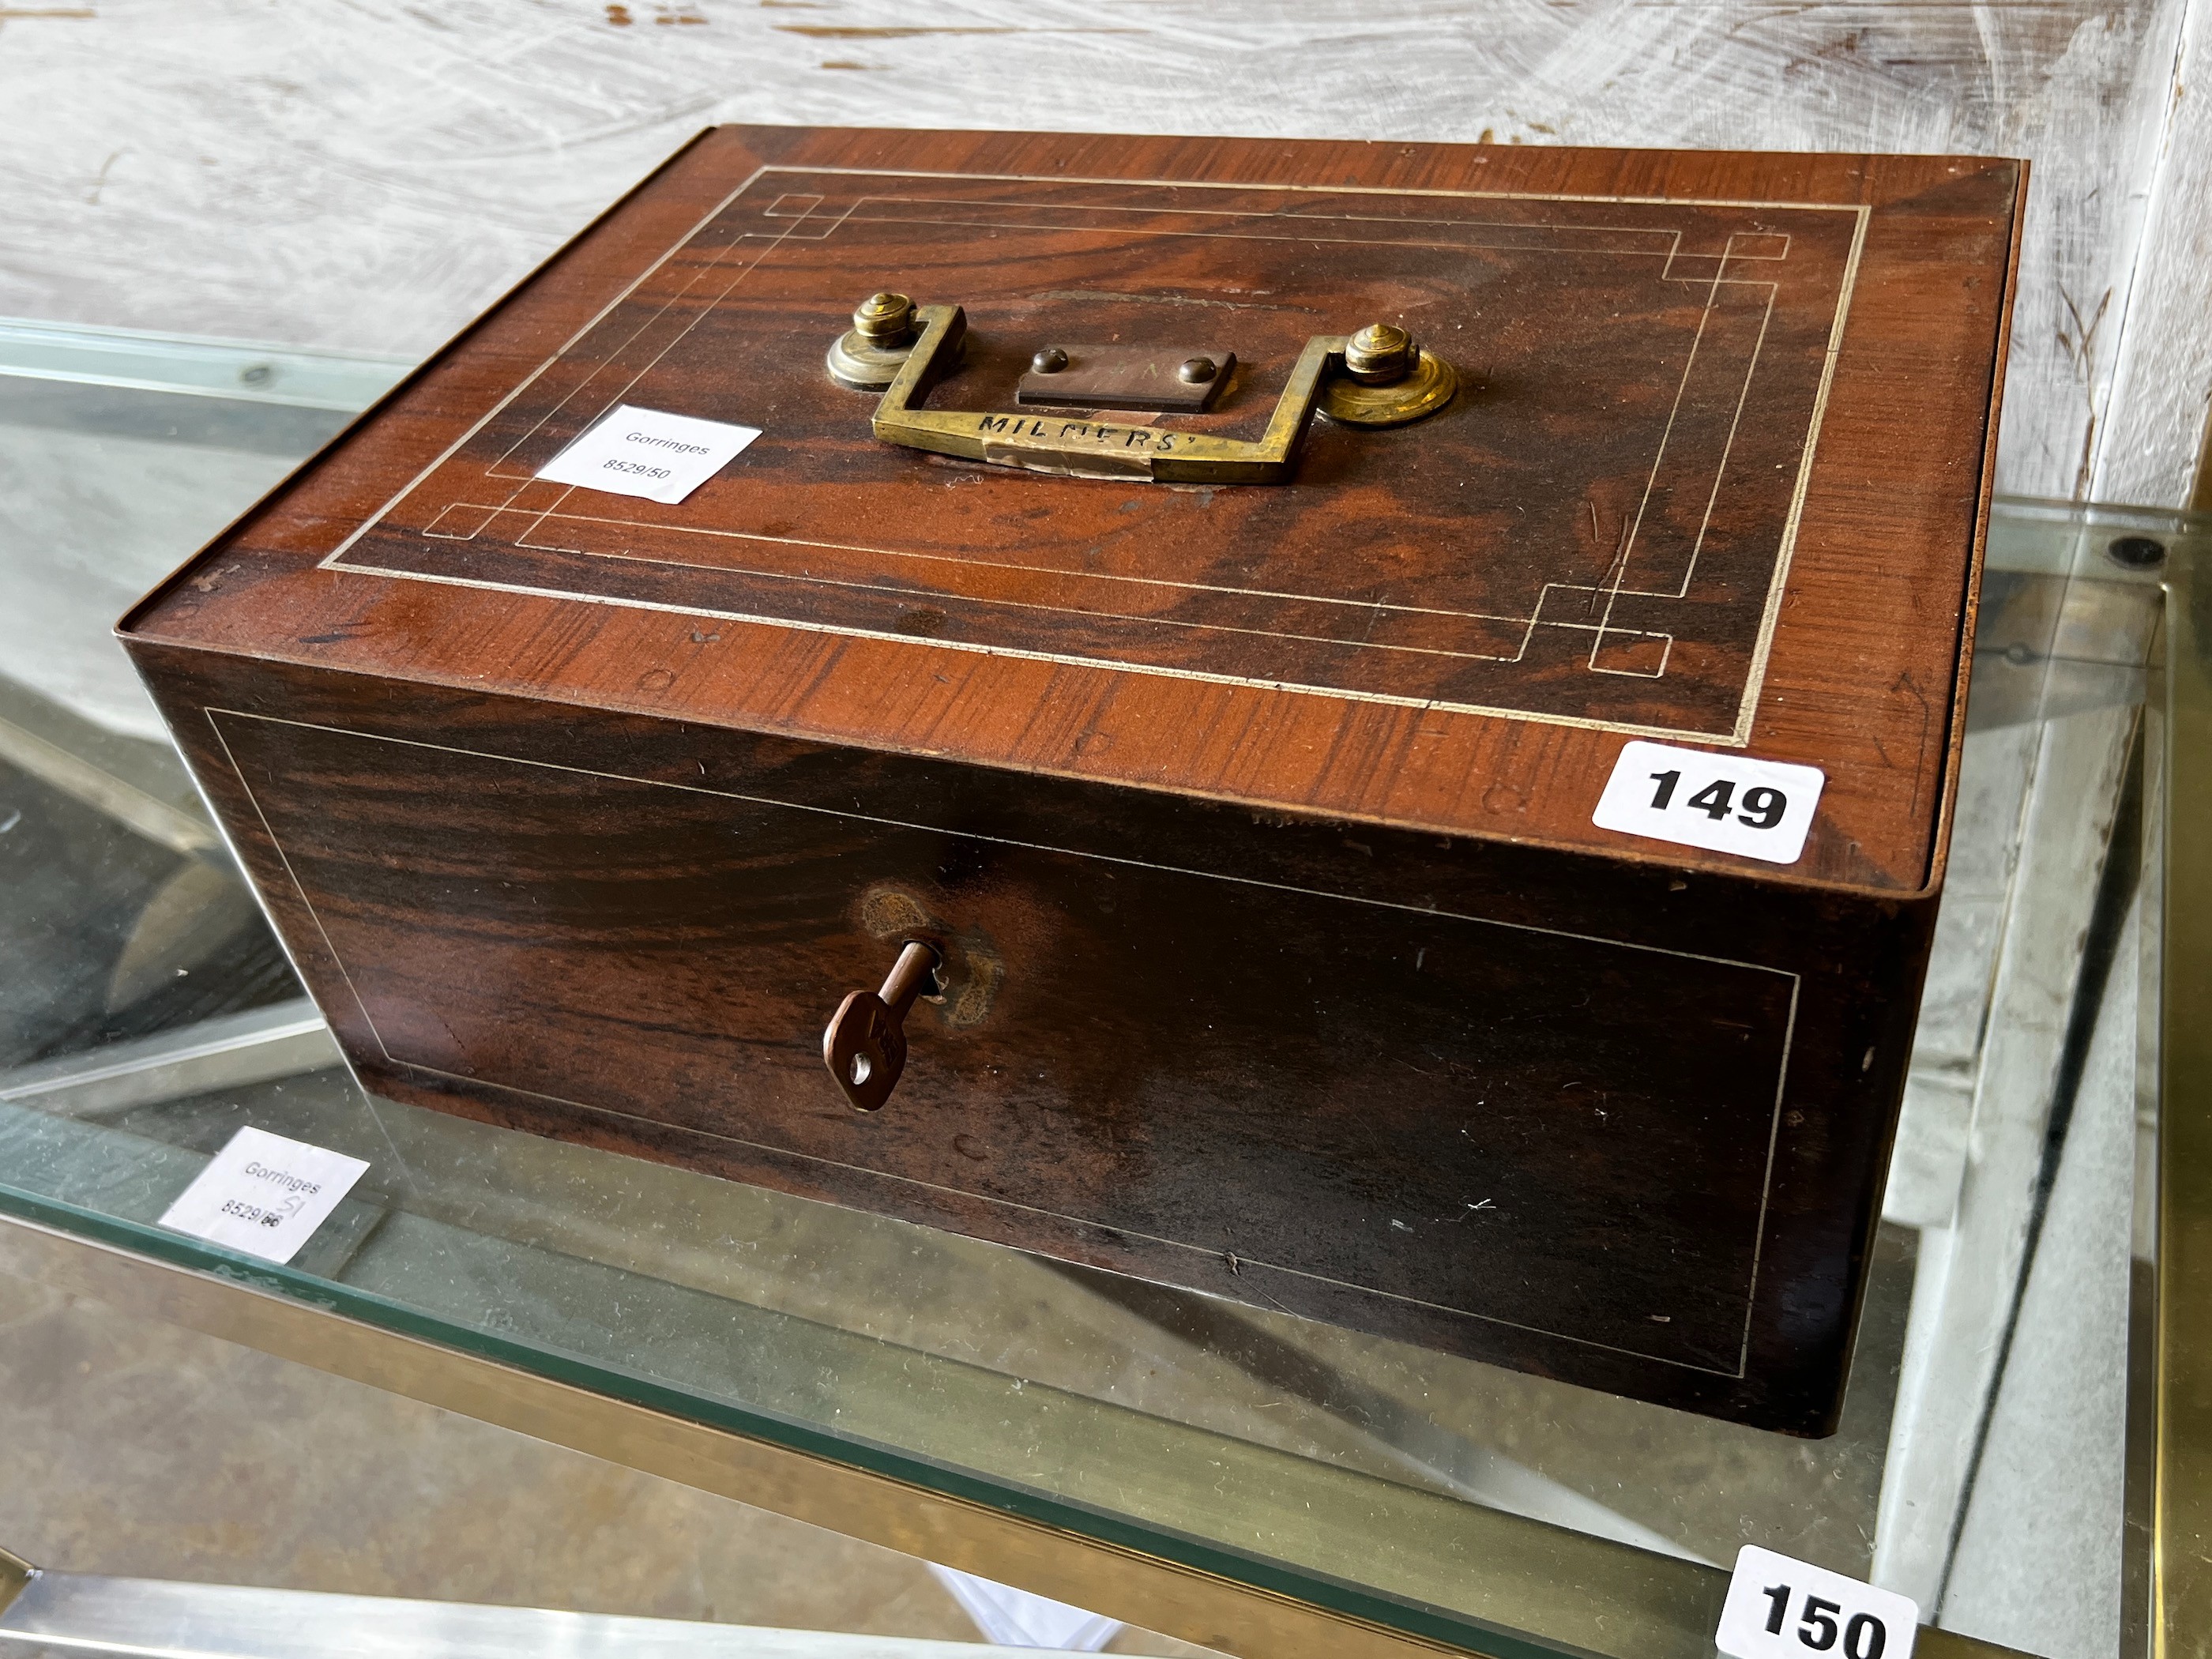 A milner's strong box with painted simulated grain, width 35cm, depth 26cm, height 14cm                                                                                                                                     